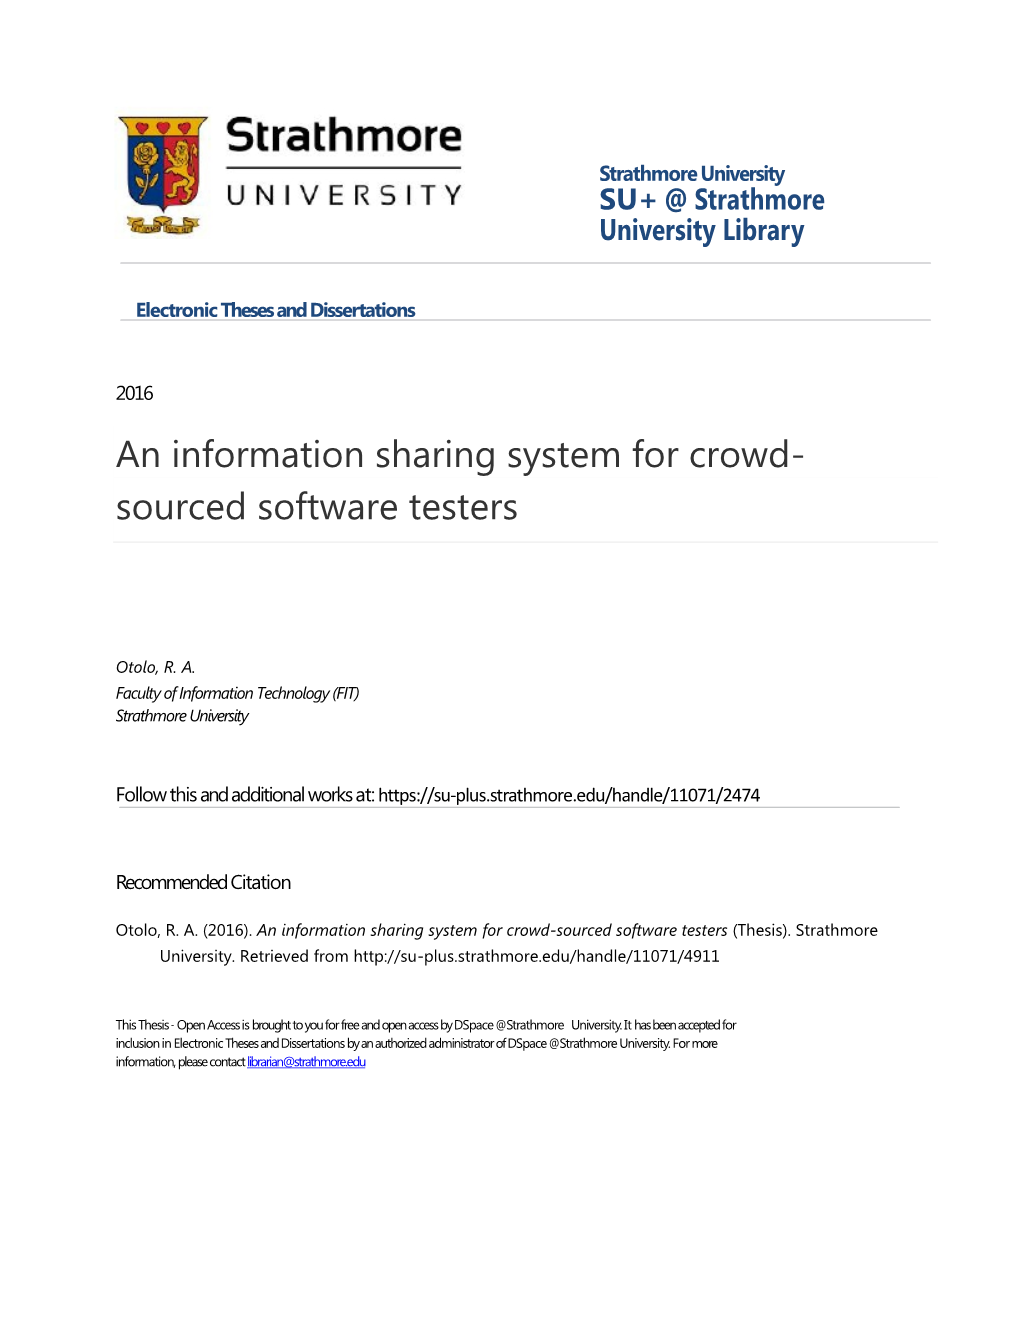 An Information Sharing System for Crowd- Sourced Software Testers